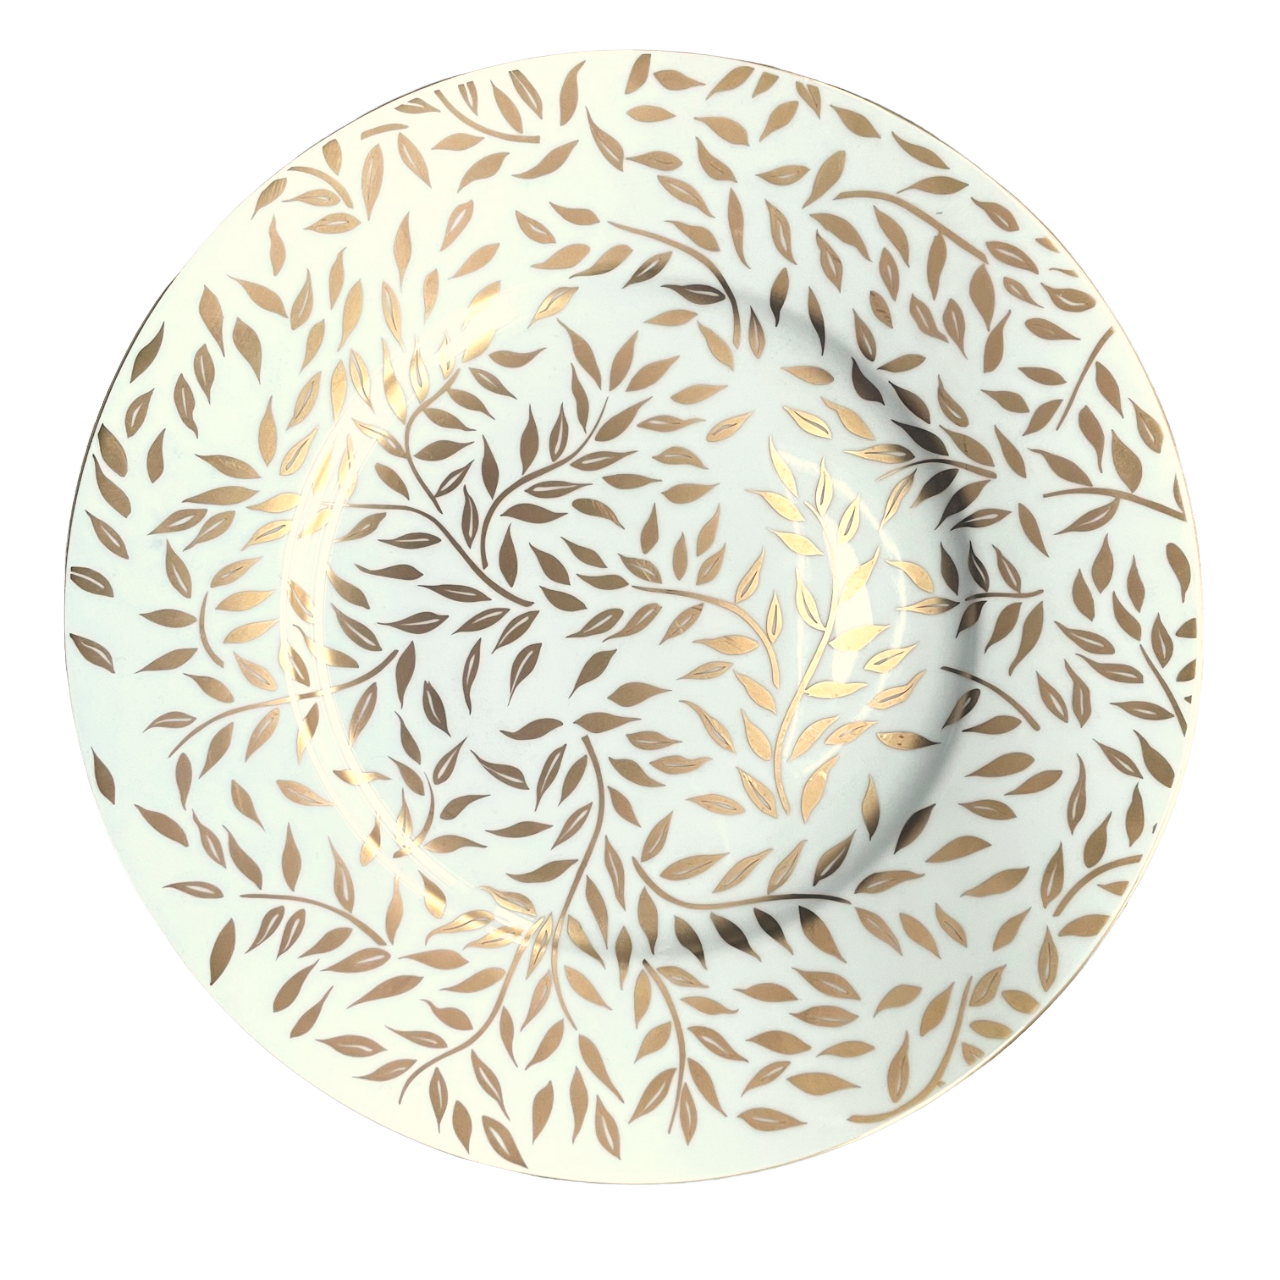 Olivier gold - Charger plate 30 cm